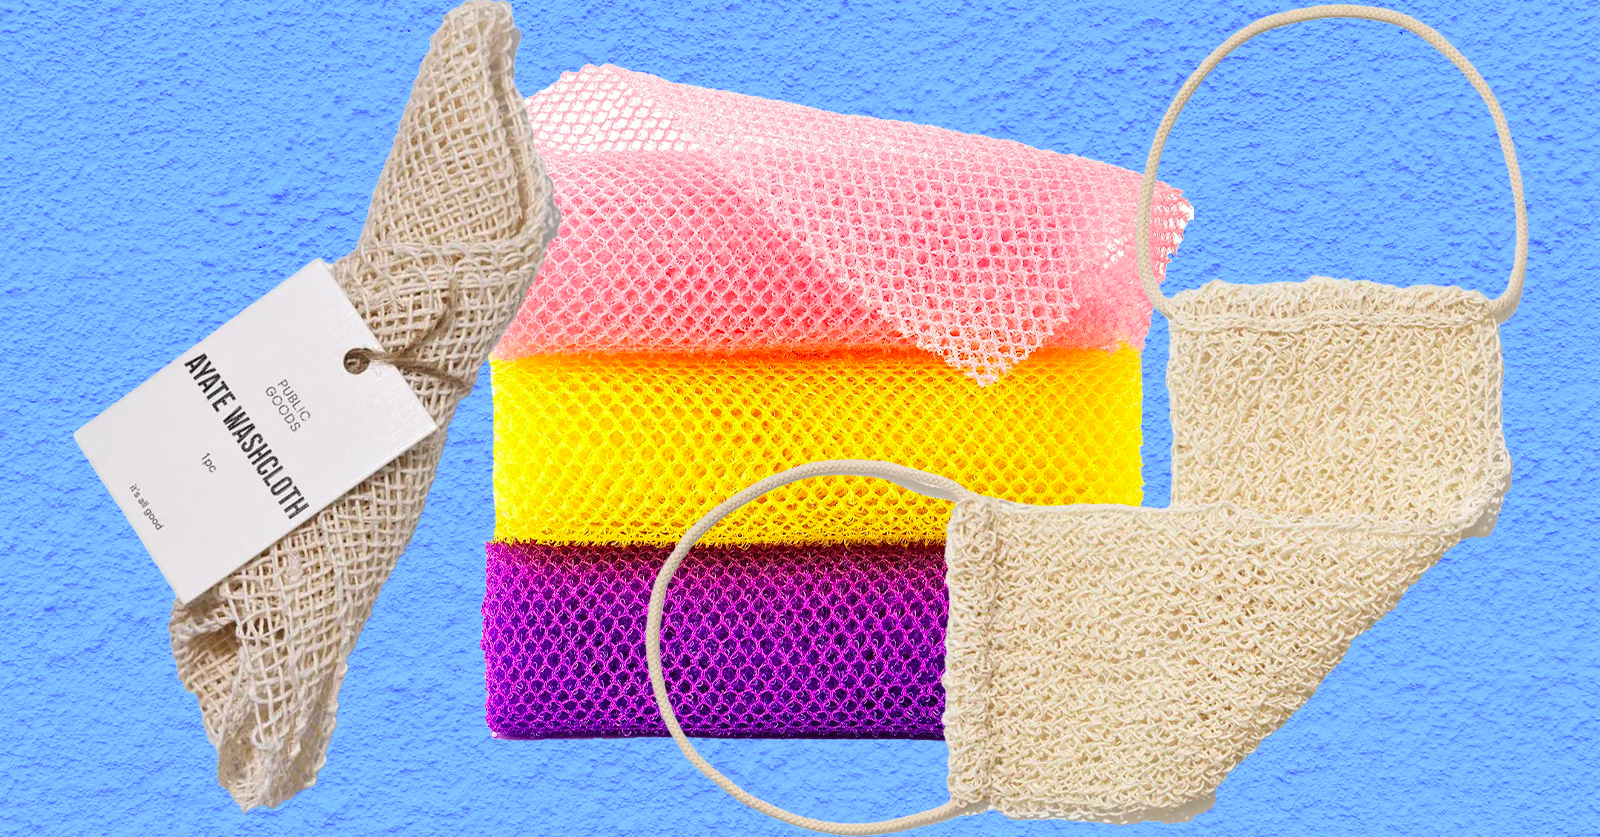 These African Net Sponges Really Can Help Give You Smoother Skin